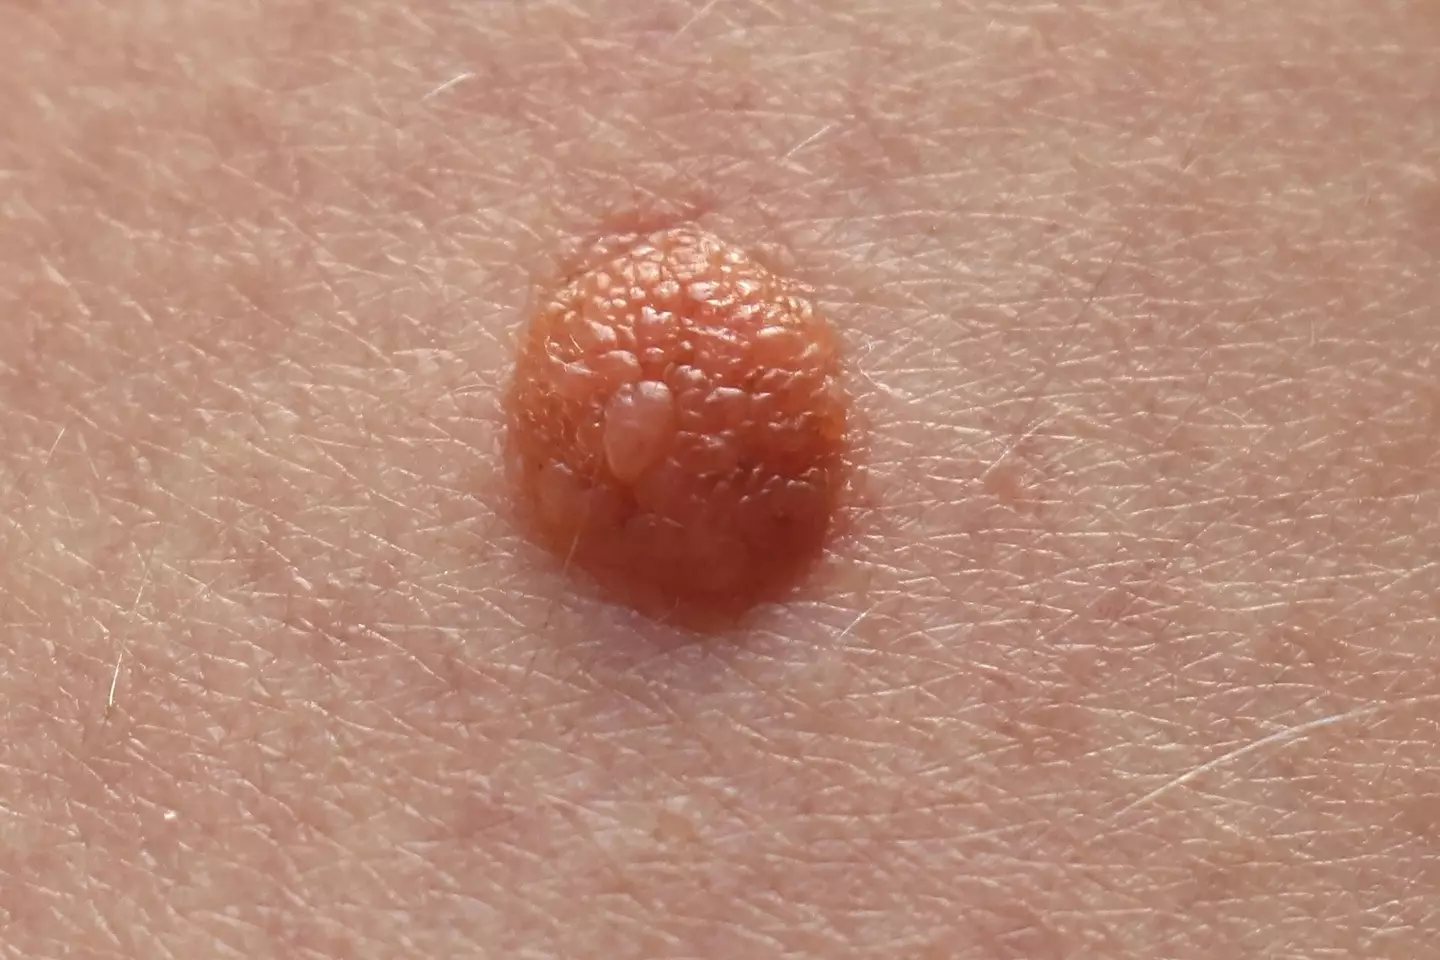 Scientists hope to develop a drug to treat melanoma.